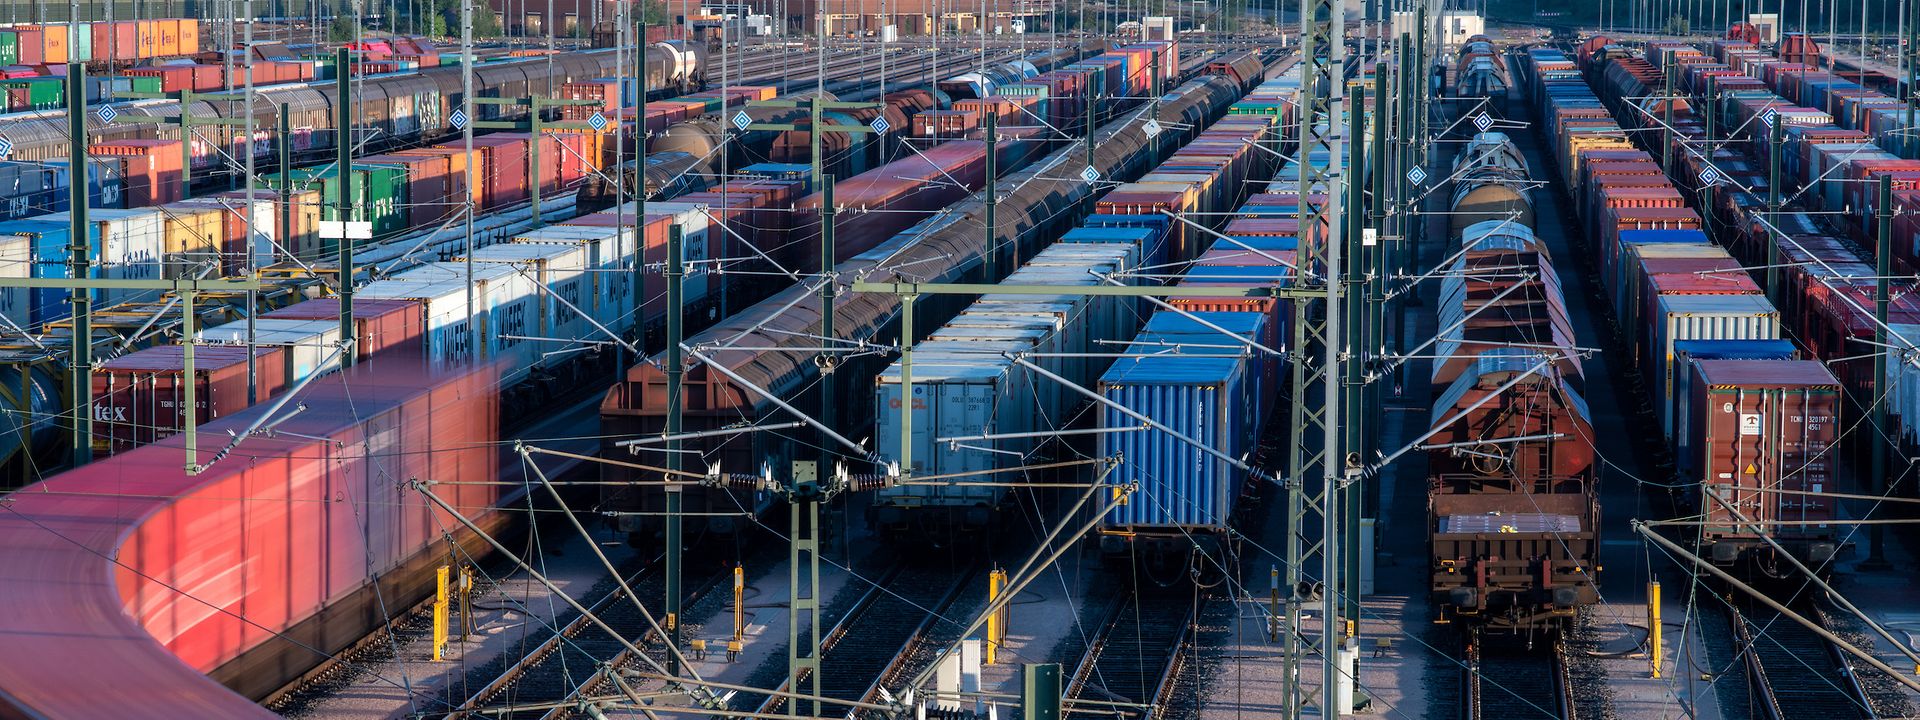 Trains at rail freight station.